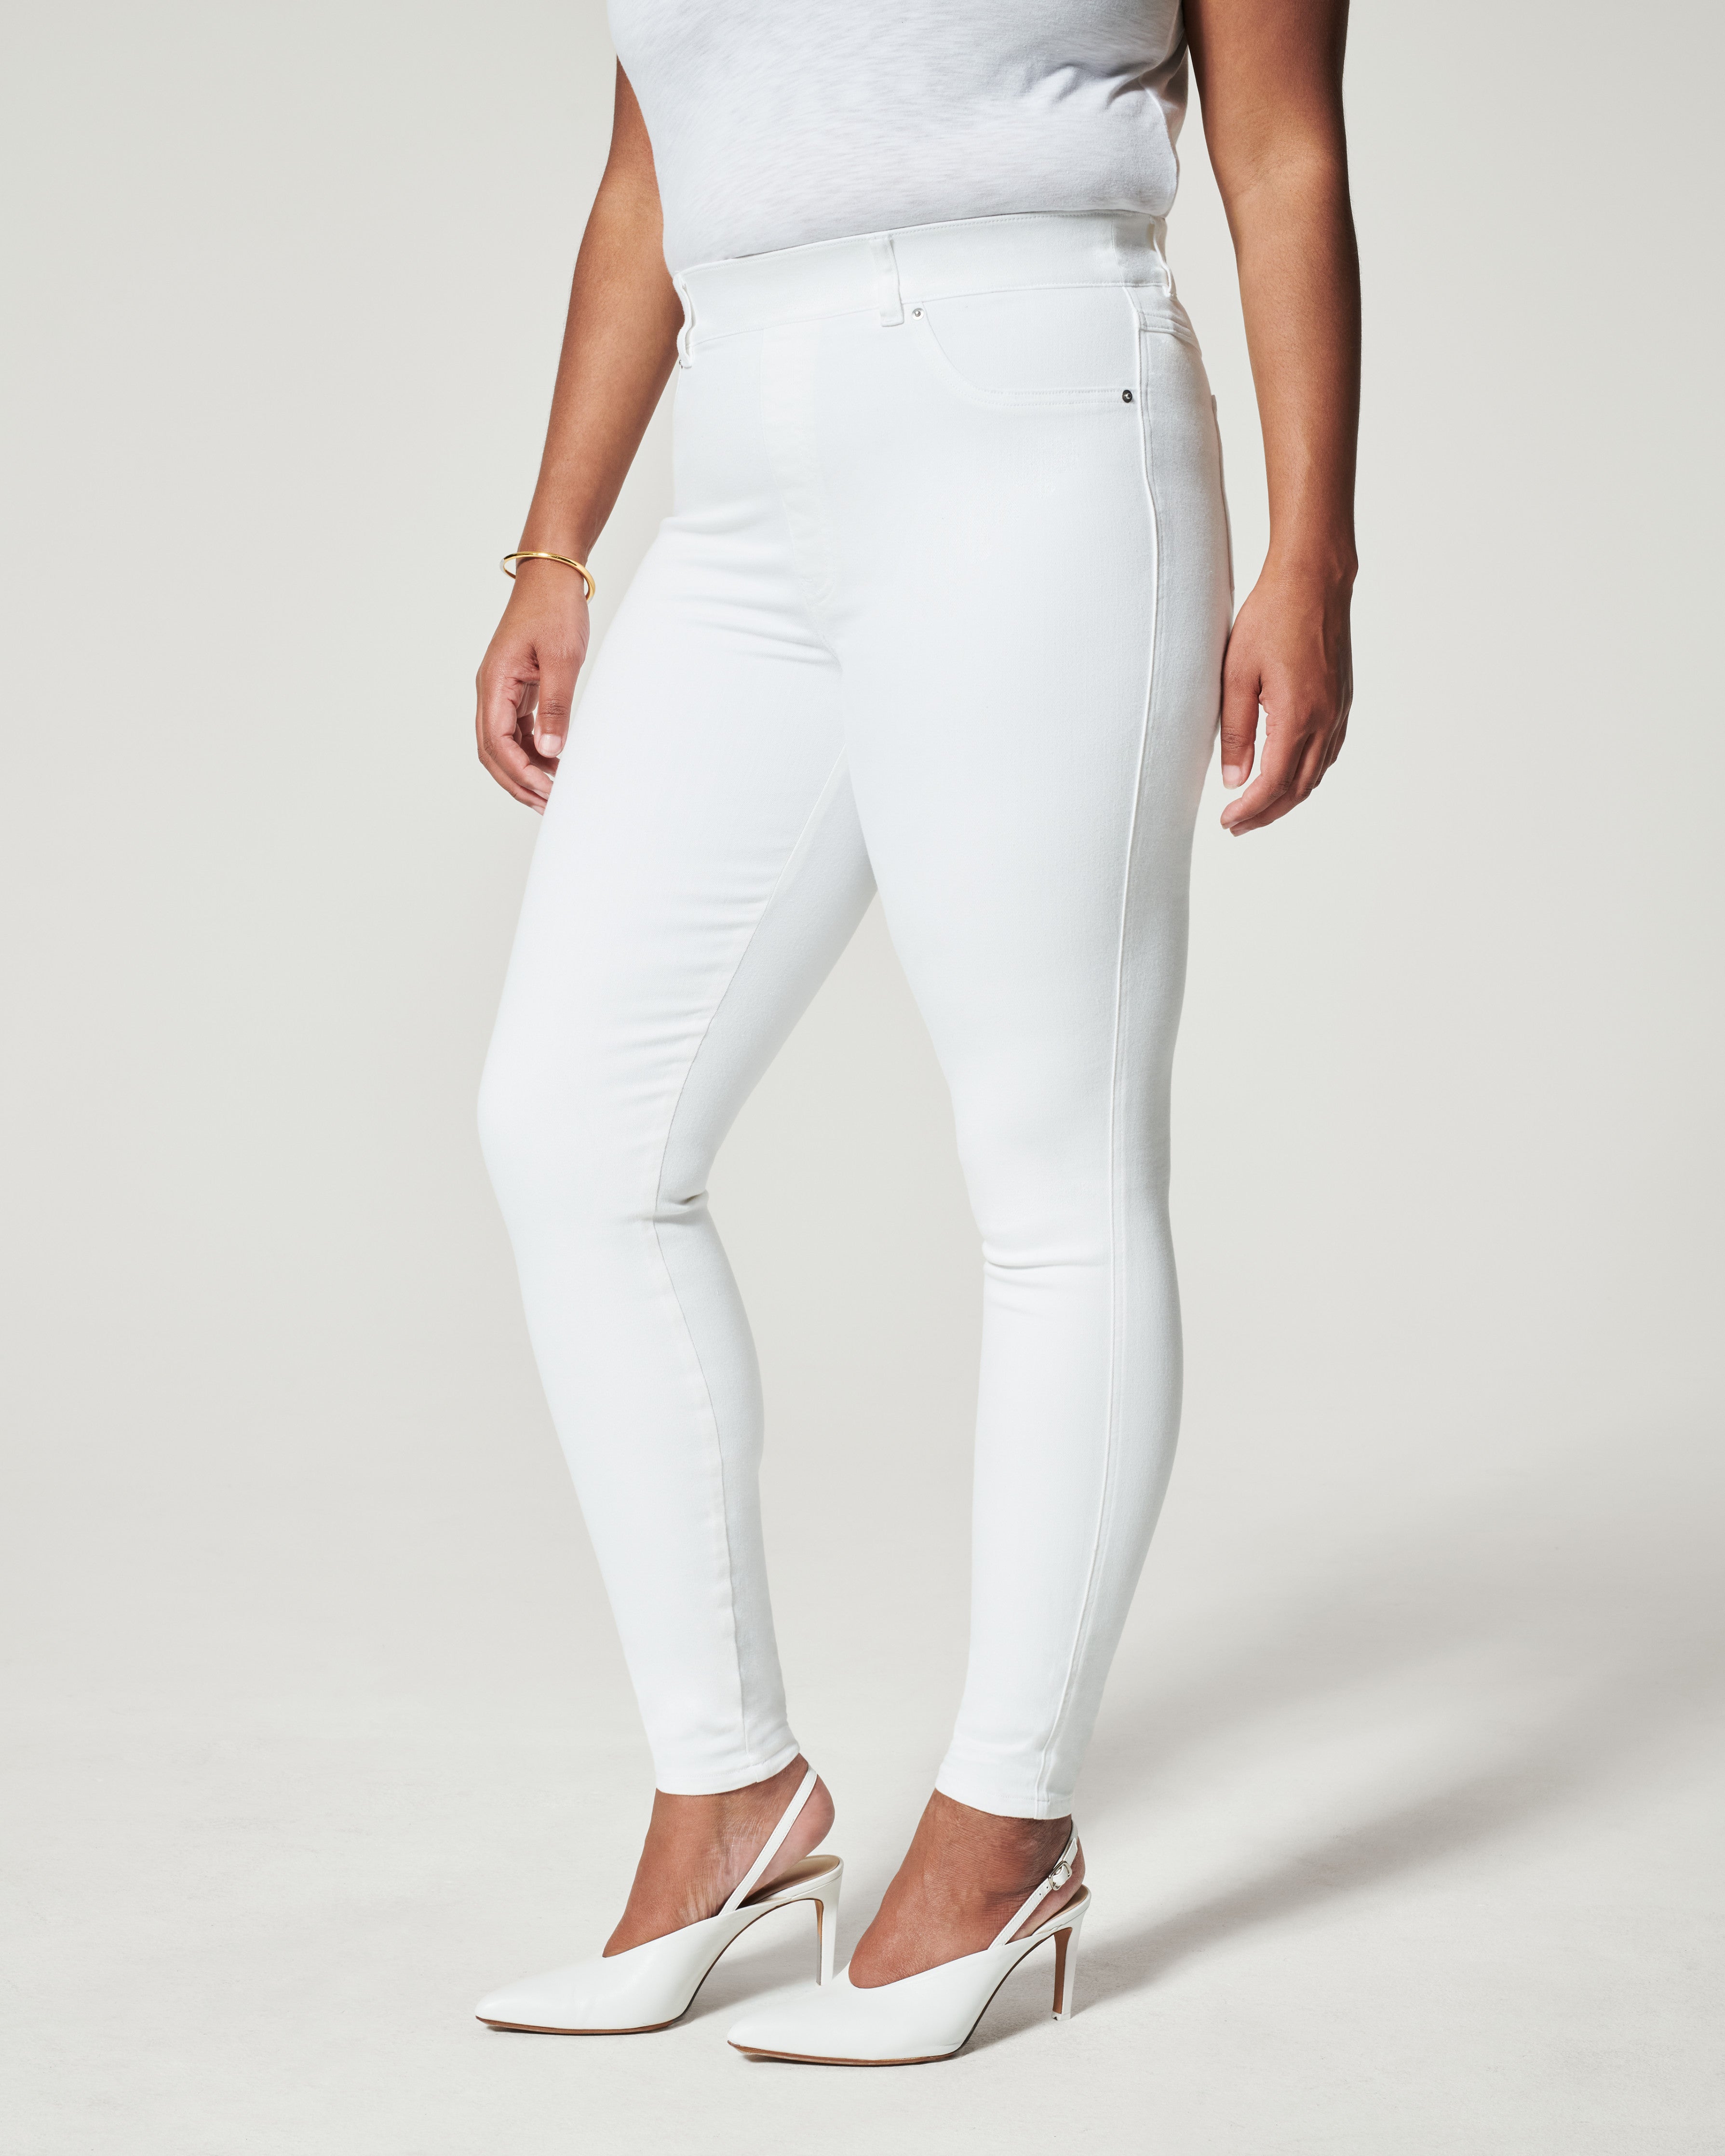 Ankle Skinny Jeans, White